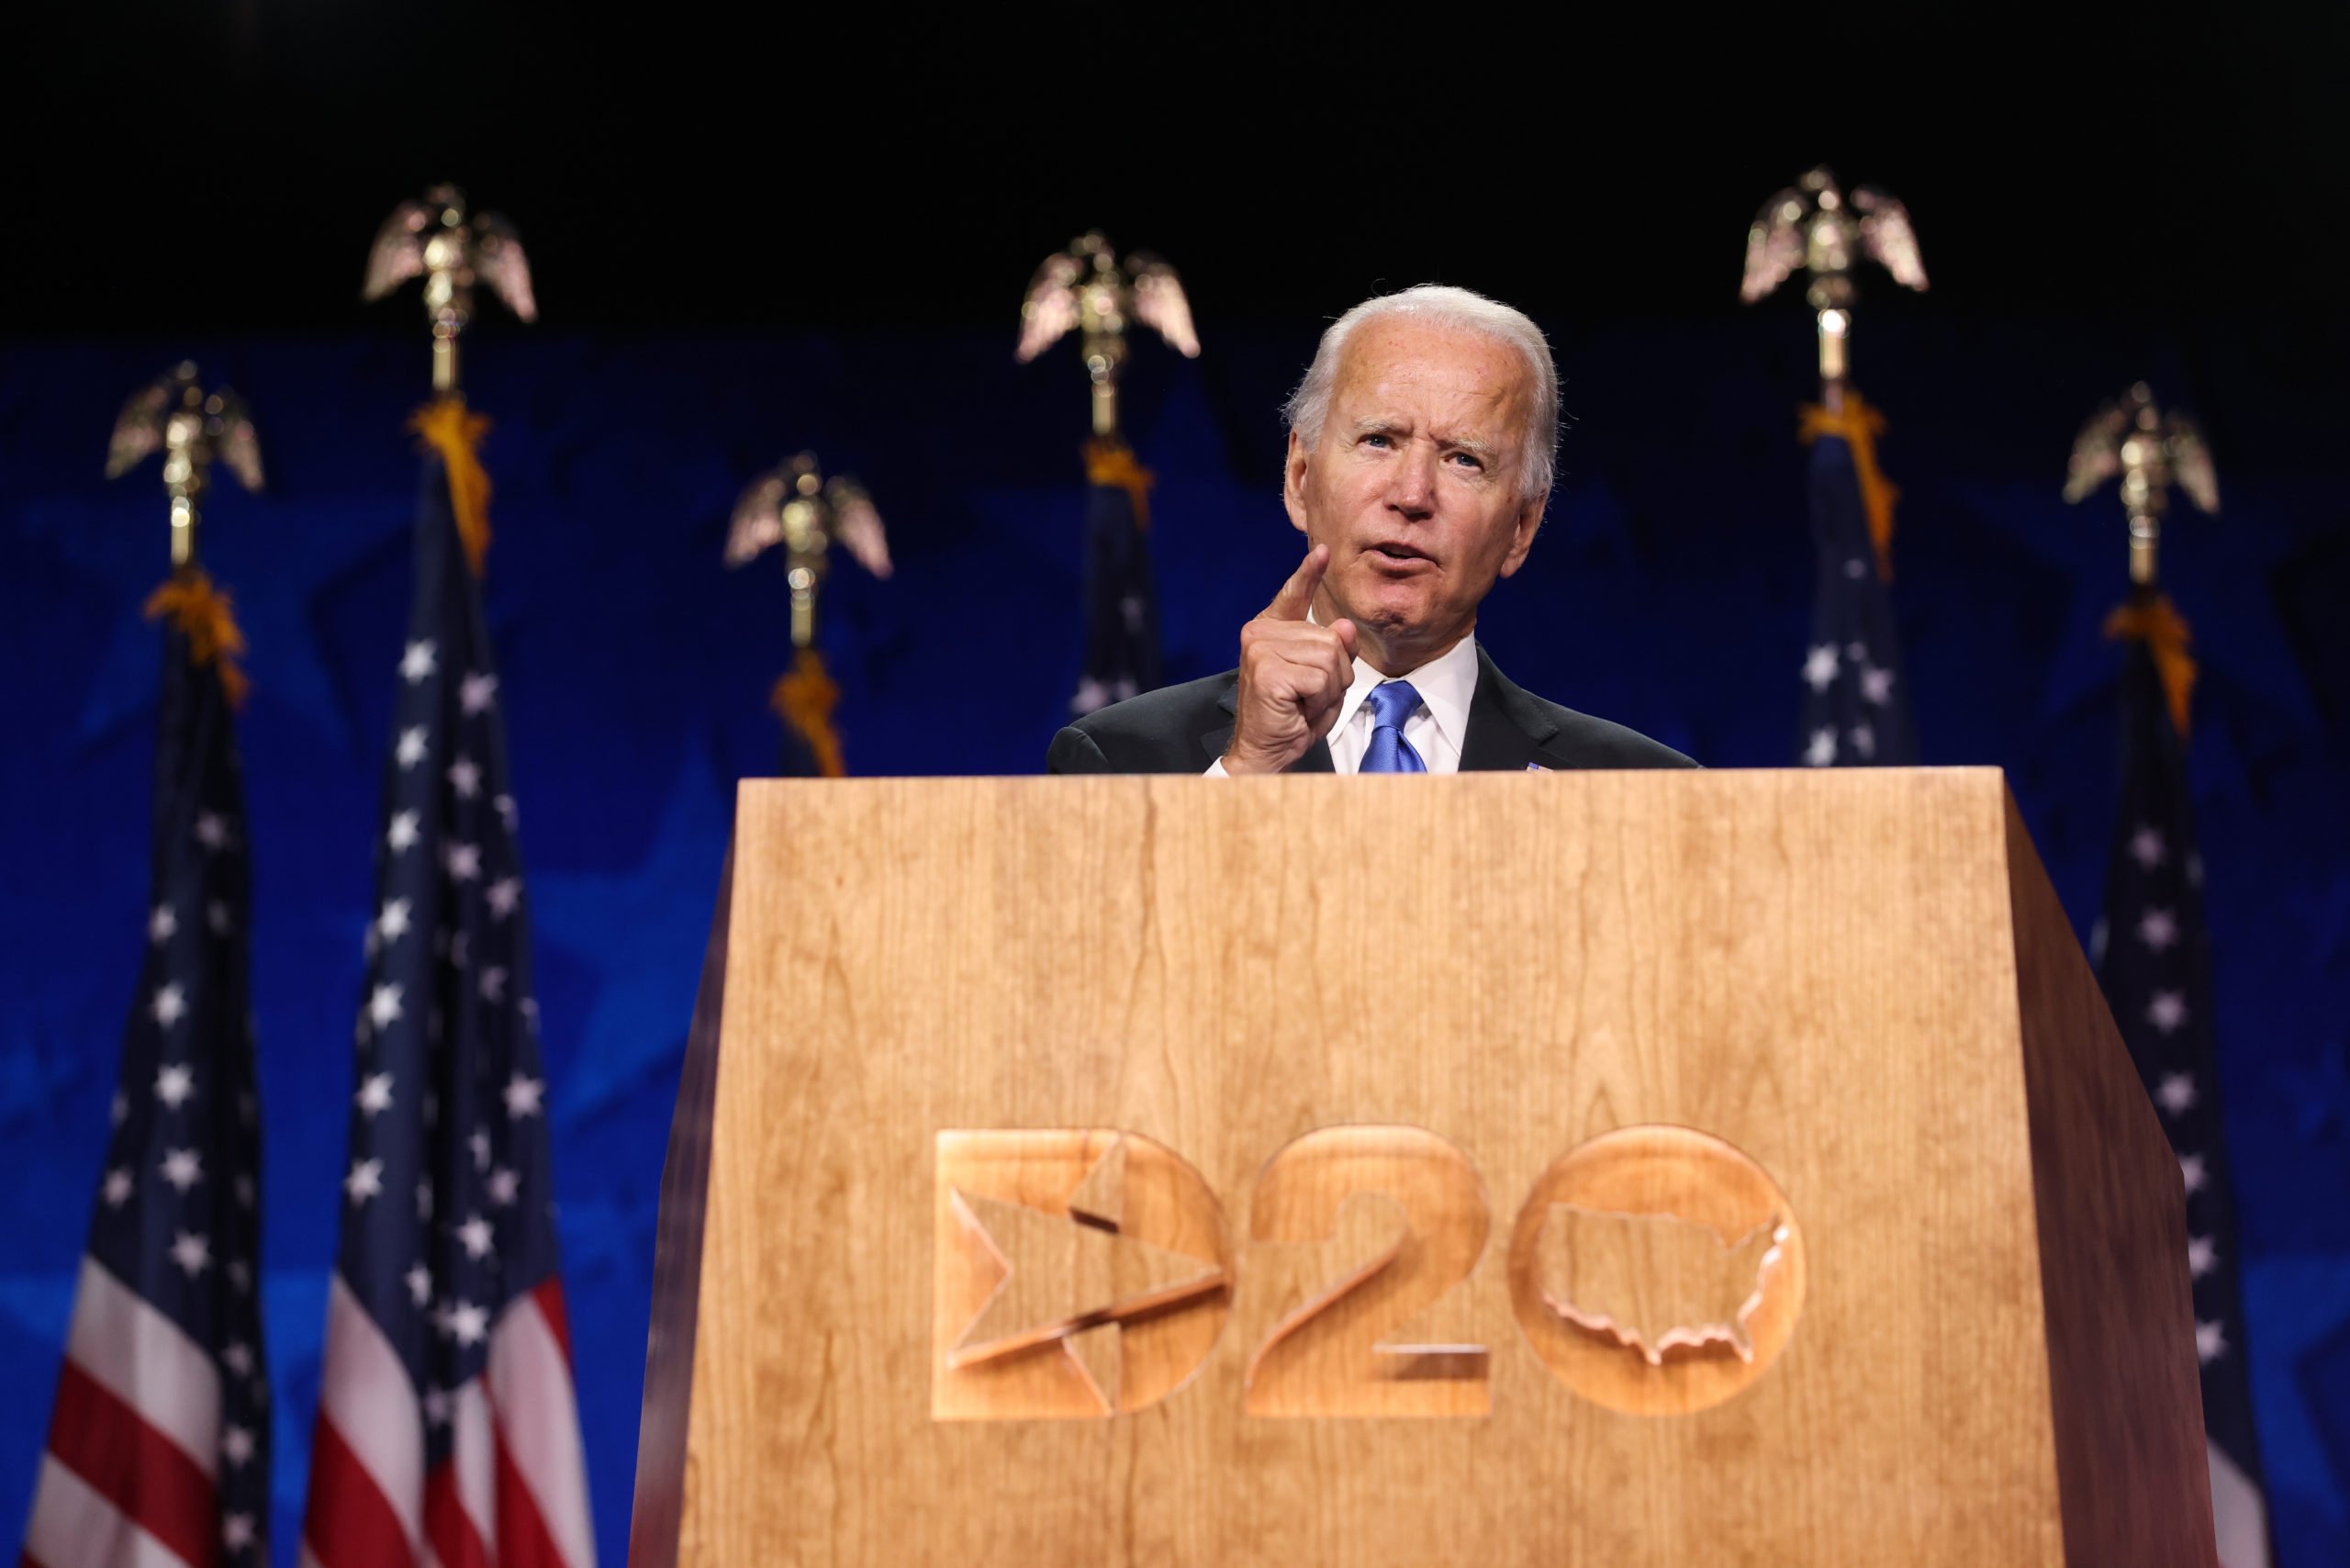 Democratic presidential nominee Joe Biden said in an interviewing airing Sunday that he is not ruling out running for a second term if he is successful in winning the 2020 election.